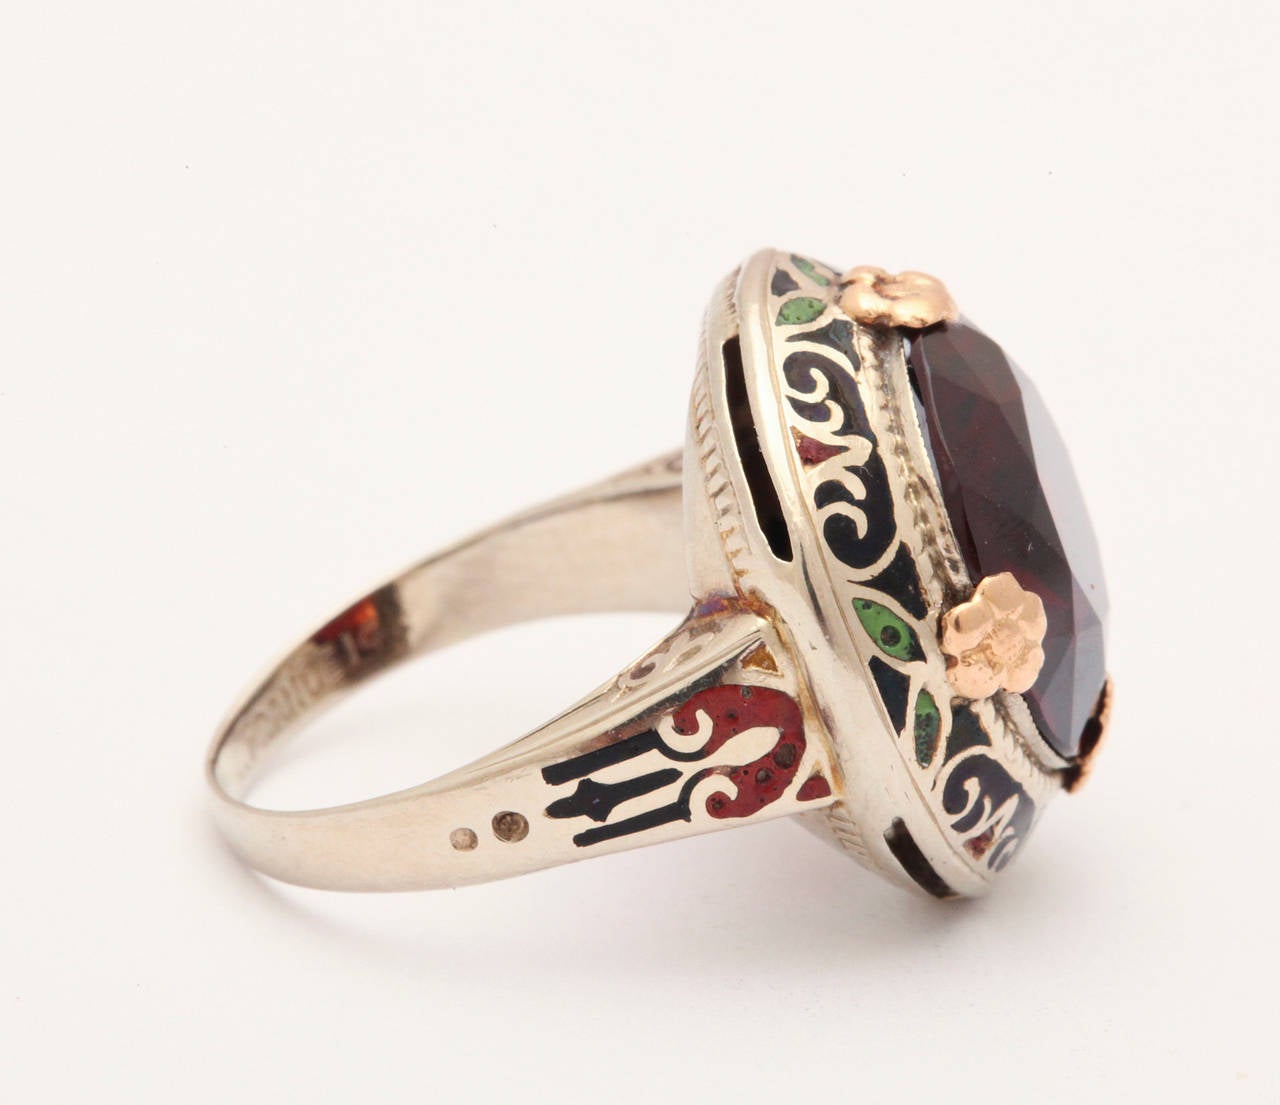 An generous 6.4 kt faceted garnet, surrounded by polychrome symbols. is set in 14kt white and rose gold for a visual treat. The dramatic color palette surrounding the garnet is brick red, forest green and black in forms that suggest a floral motif.